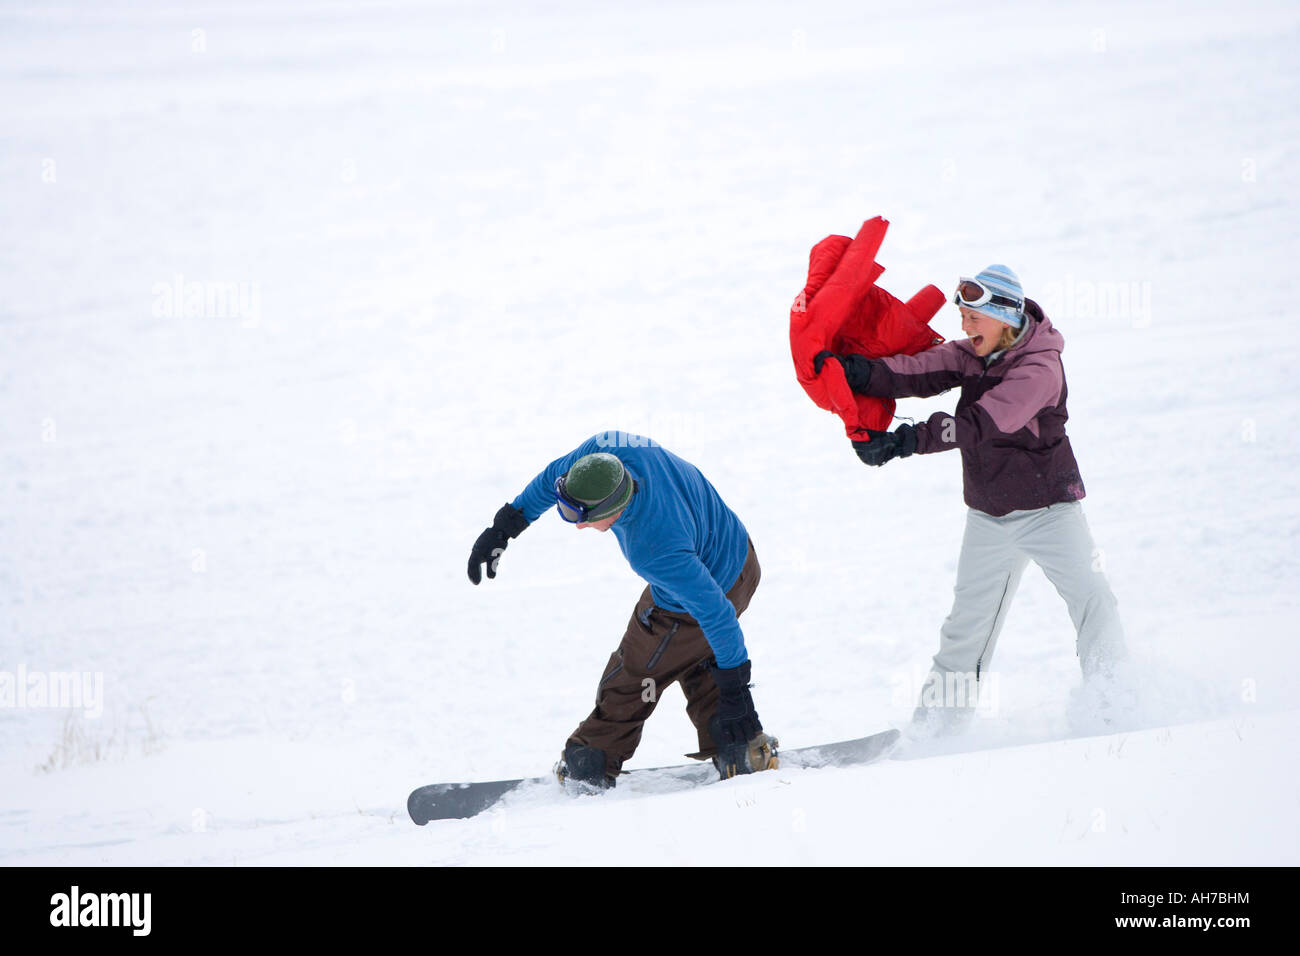 Mid adult man snowboarding past a mid adult woman Stock Photo